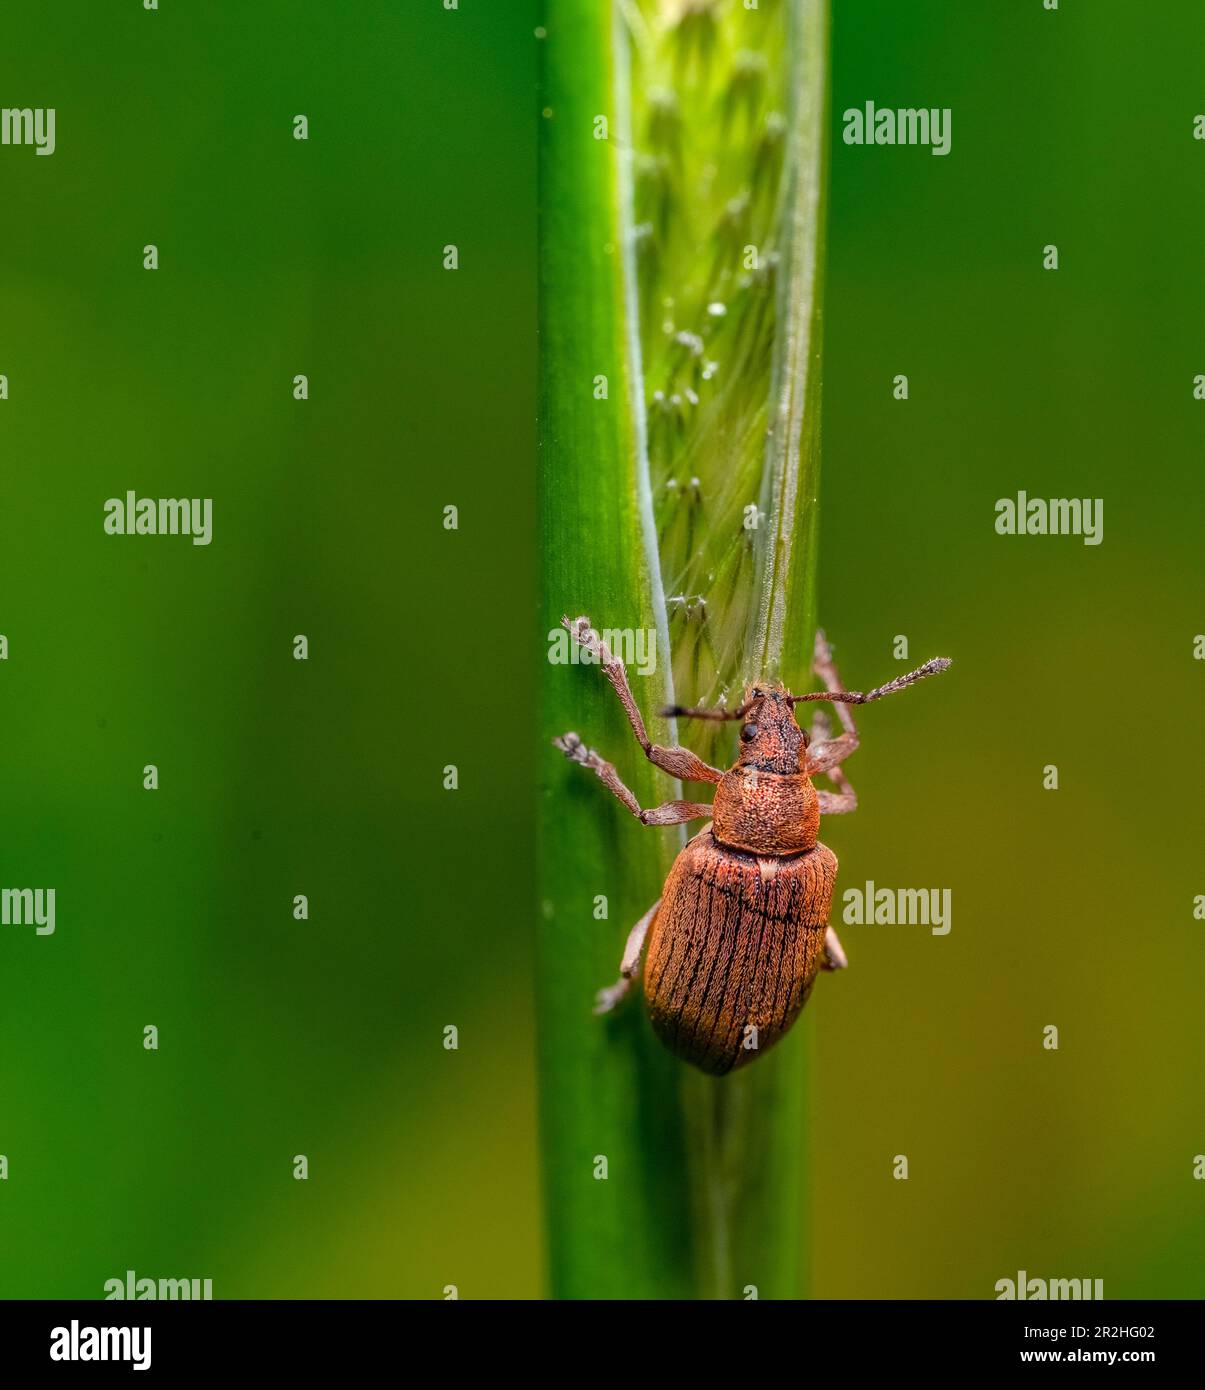 common leaf weevil at a grass stipe in green ambiance Stock Photo